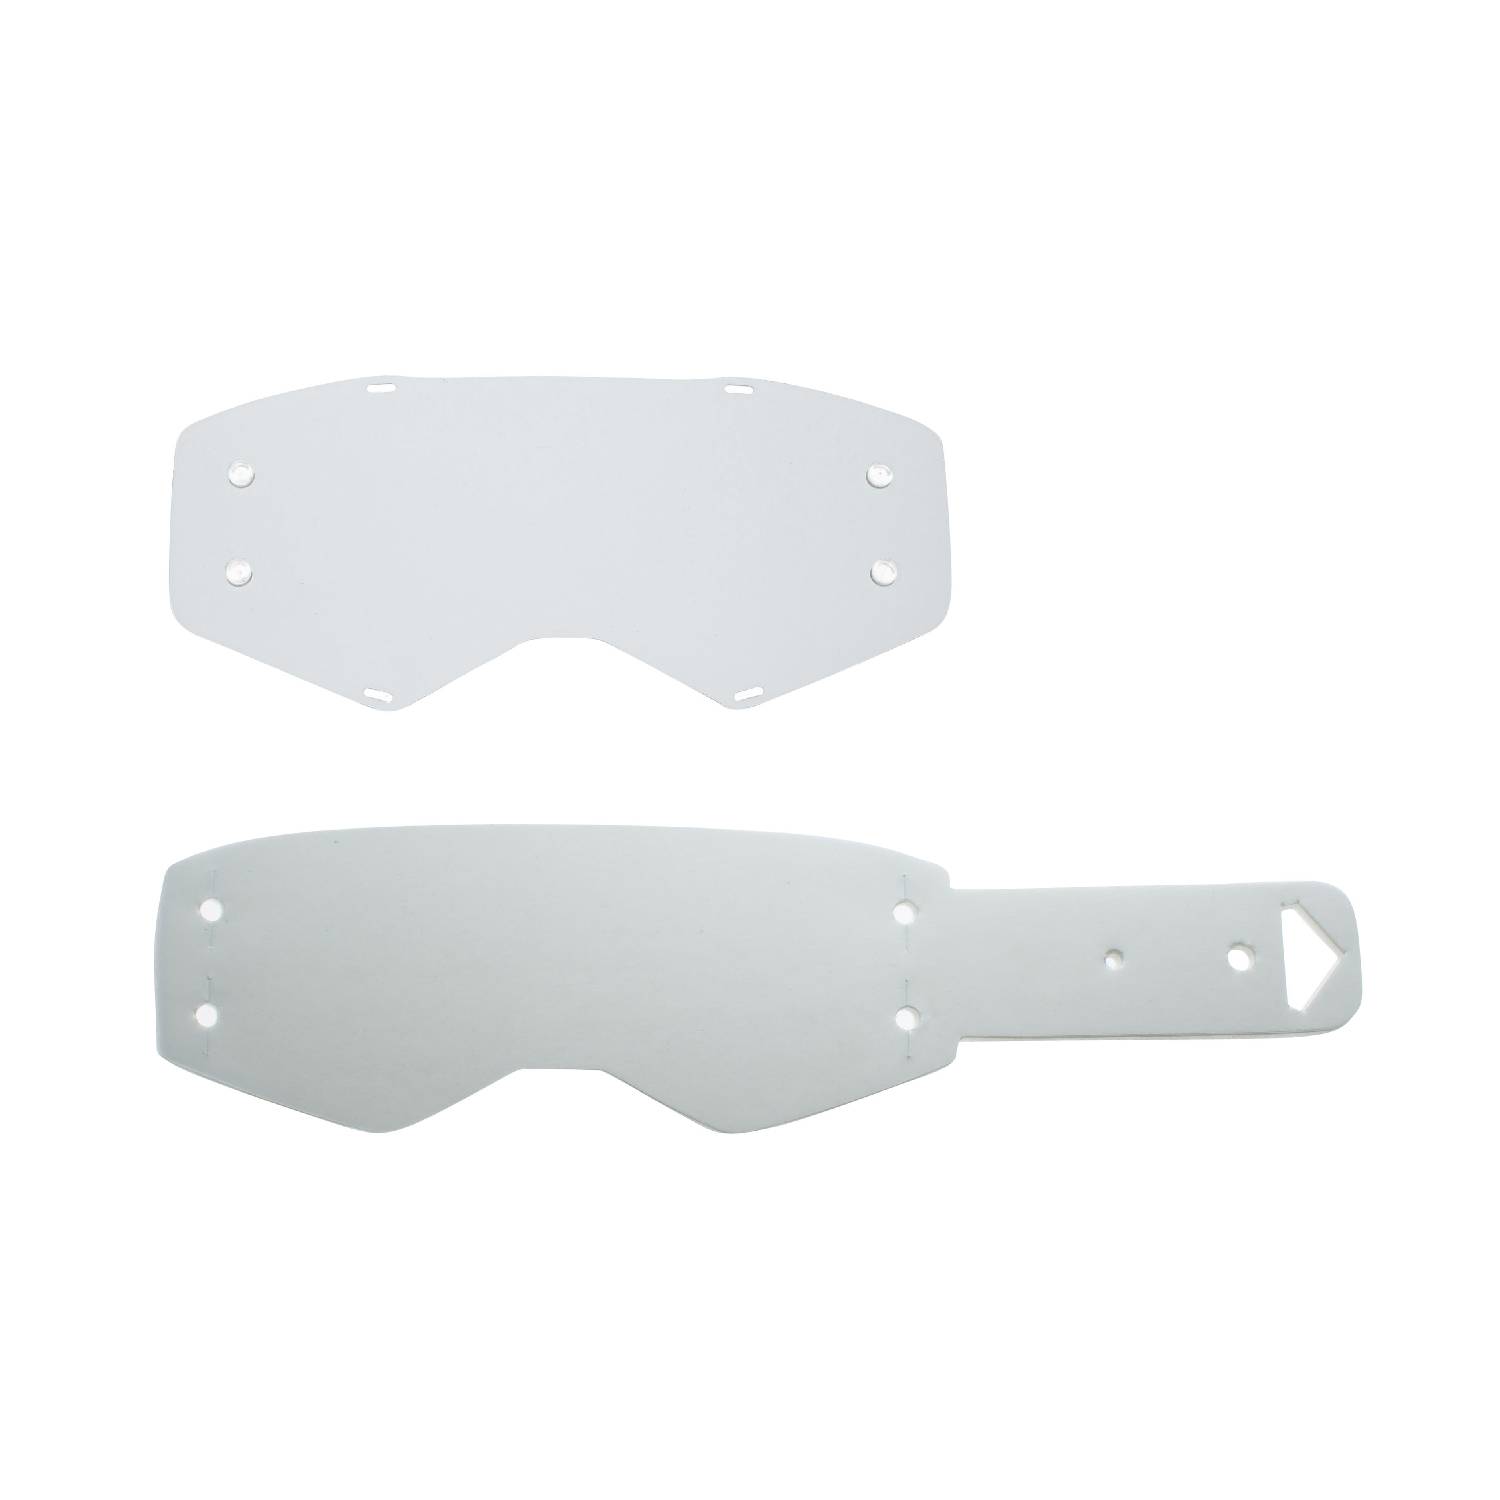 lear lens + 10 Tear-OFFS (combo) compatible for Scott Prospect/Fury goggle